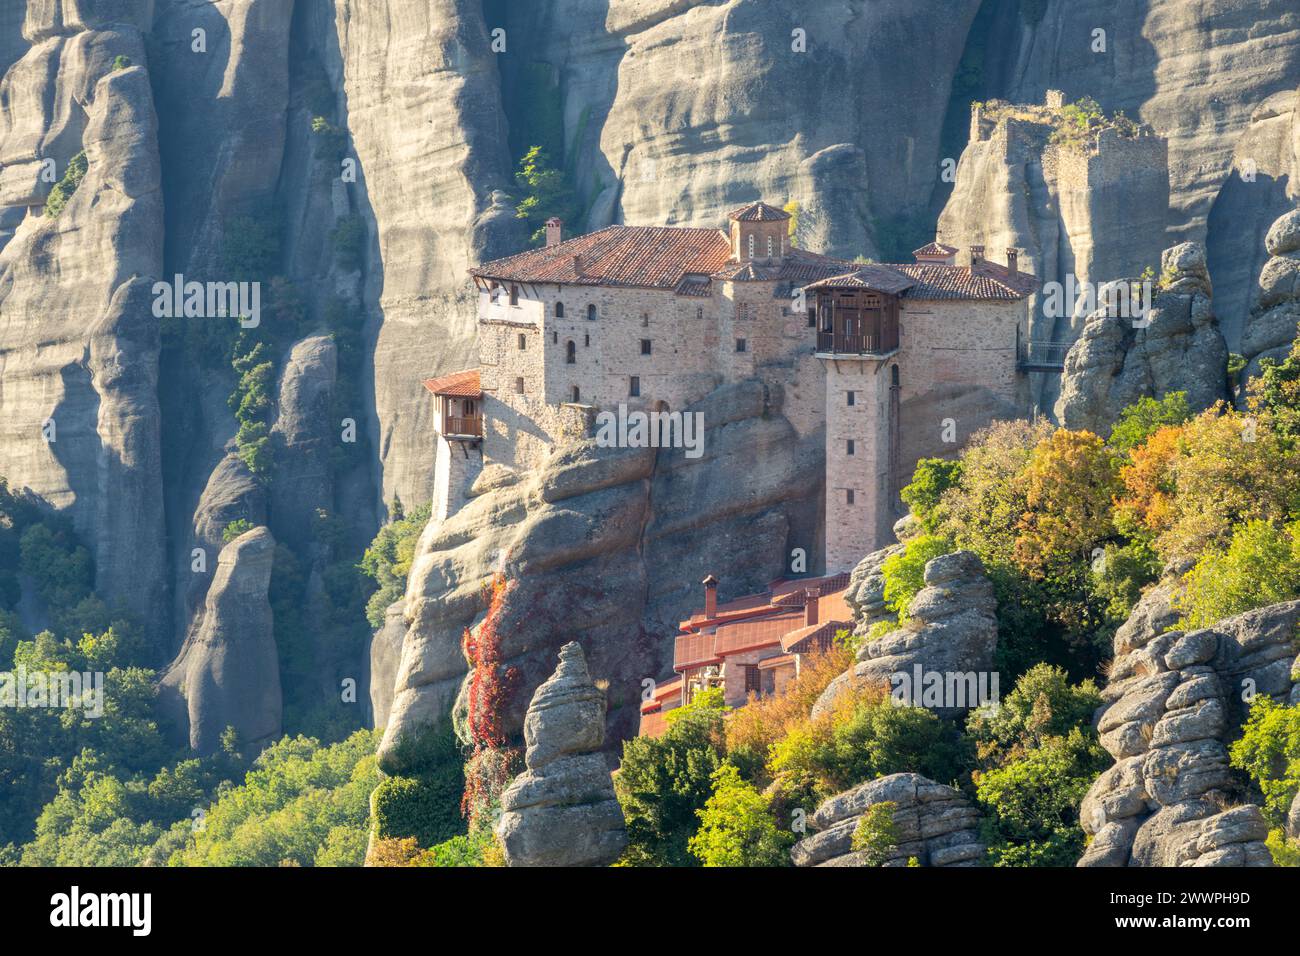 Greece. Sunny summer evening in the mountain valley of Meteora. Monastery on top of a cliff with a large mountain in the background Stock Photo